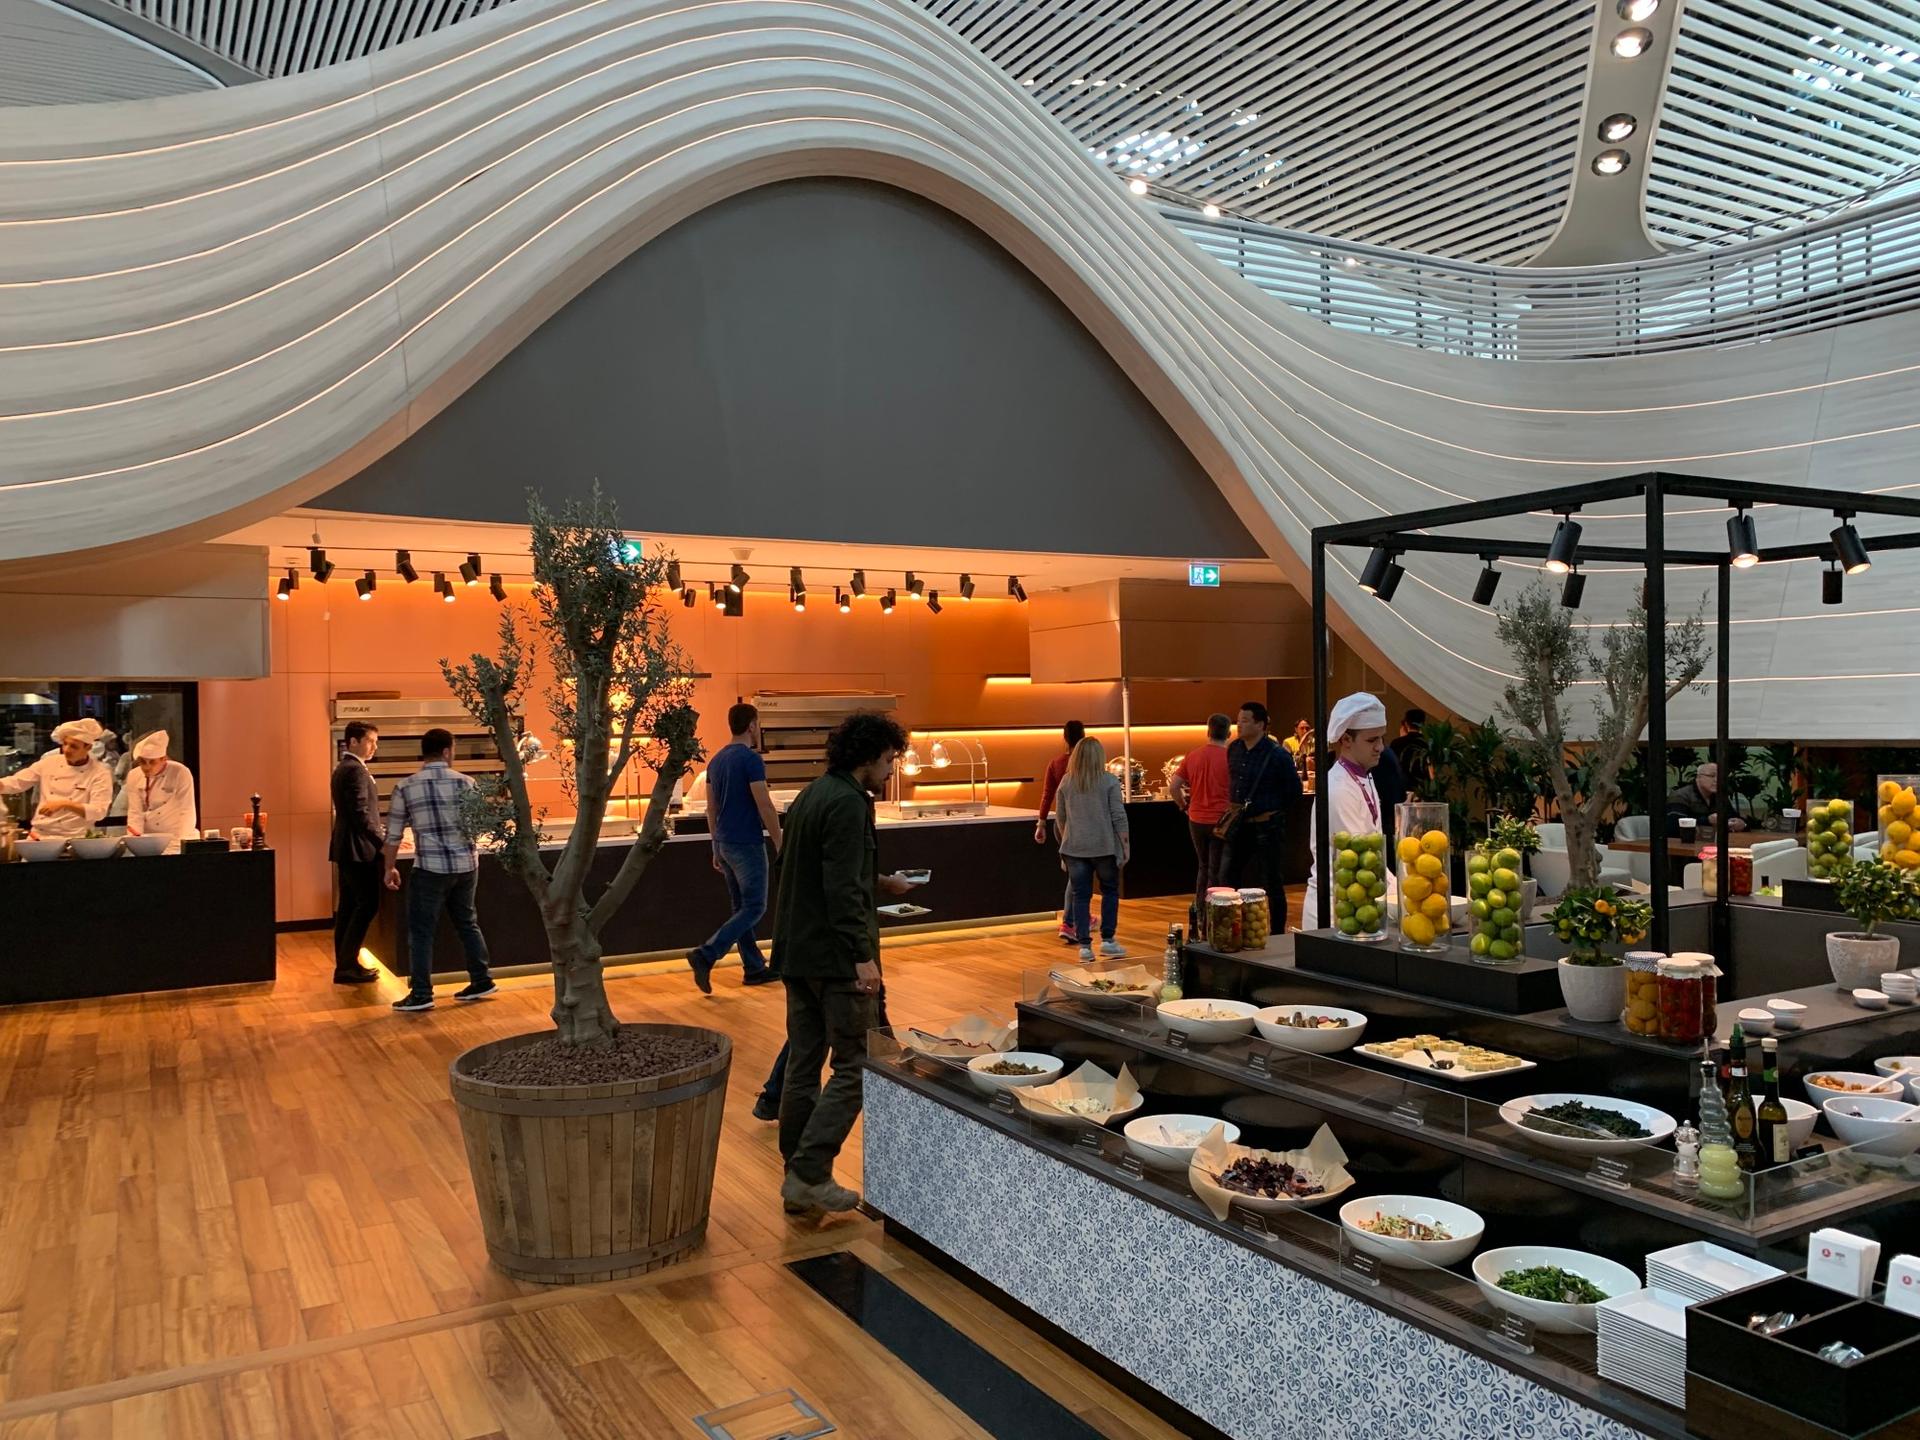 Turkish Airlines Business Lounge image 7 of 8